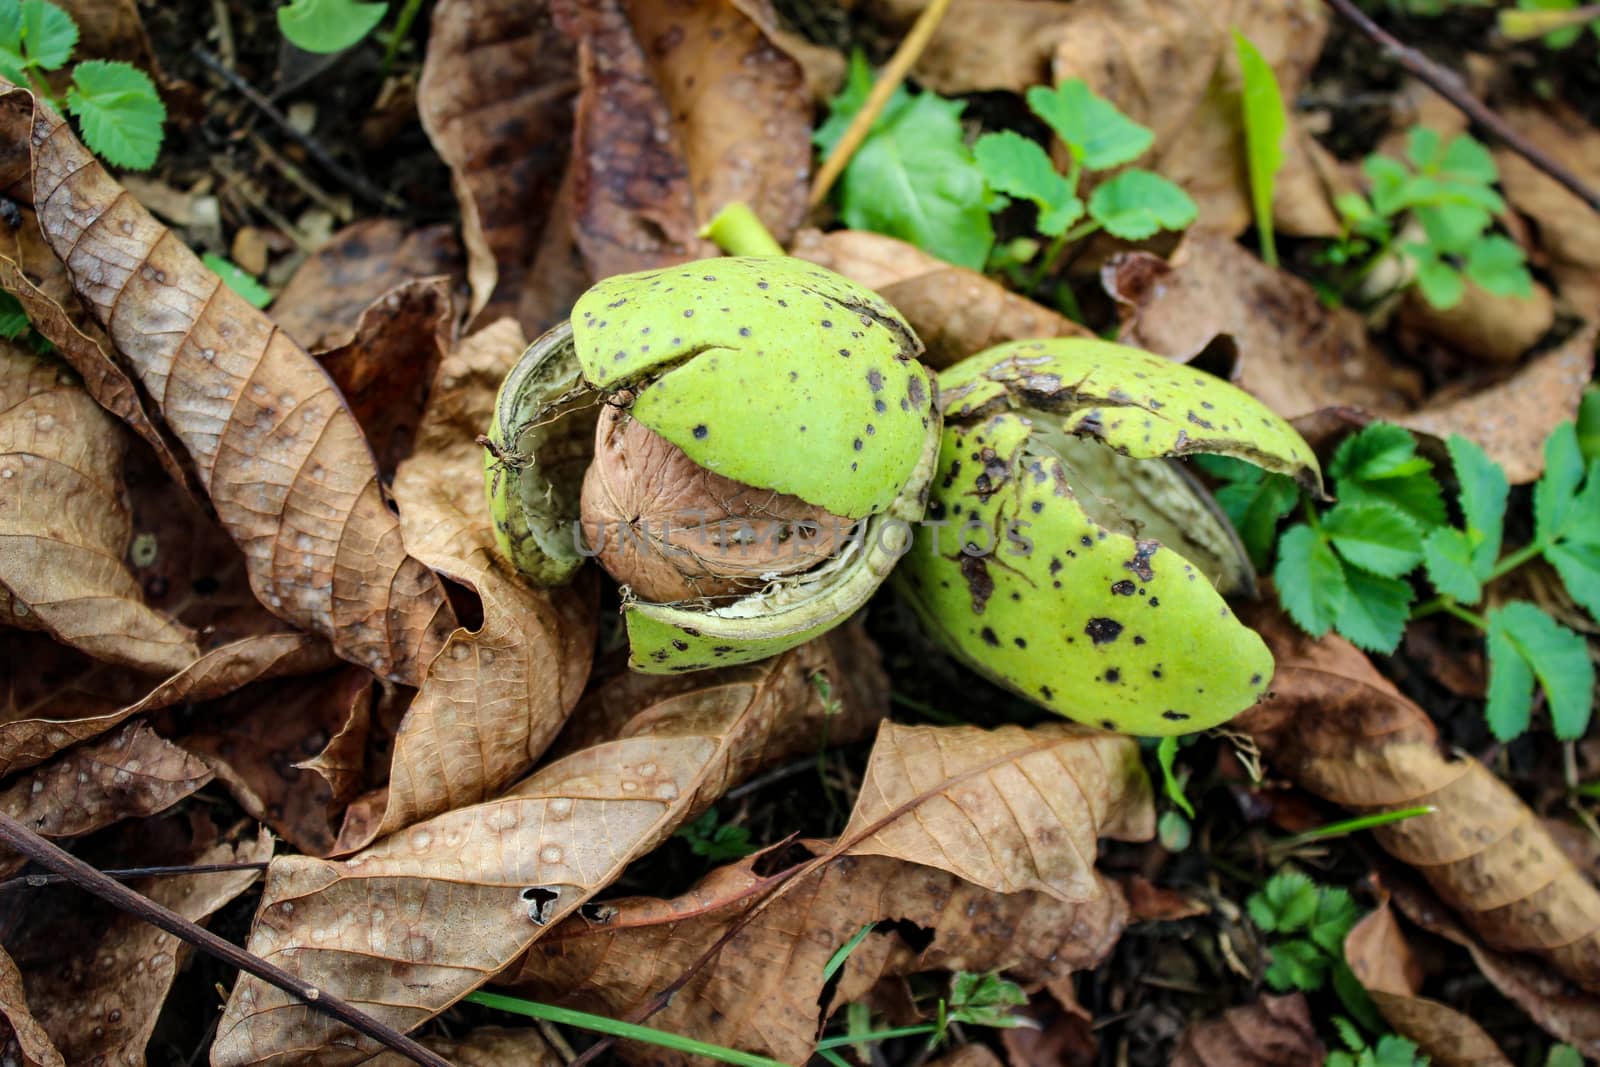 Photograph of a walnut fruit in a green shell on the ground where there is plenty of leaves and grass. by mahirrov